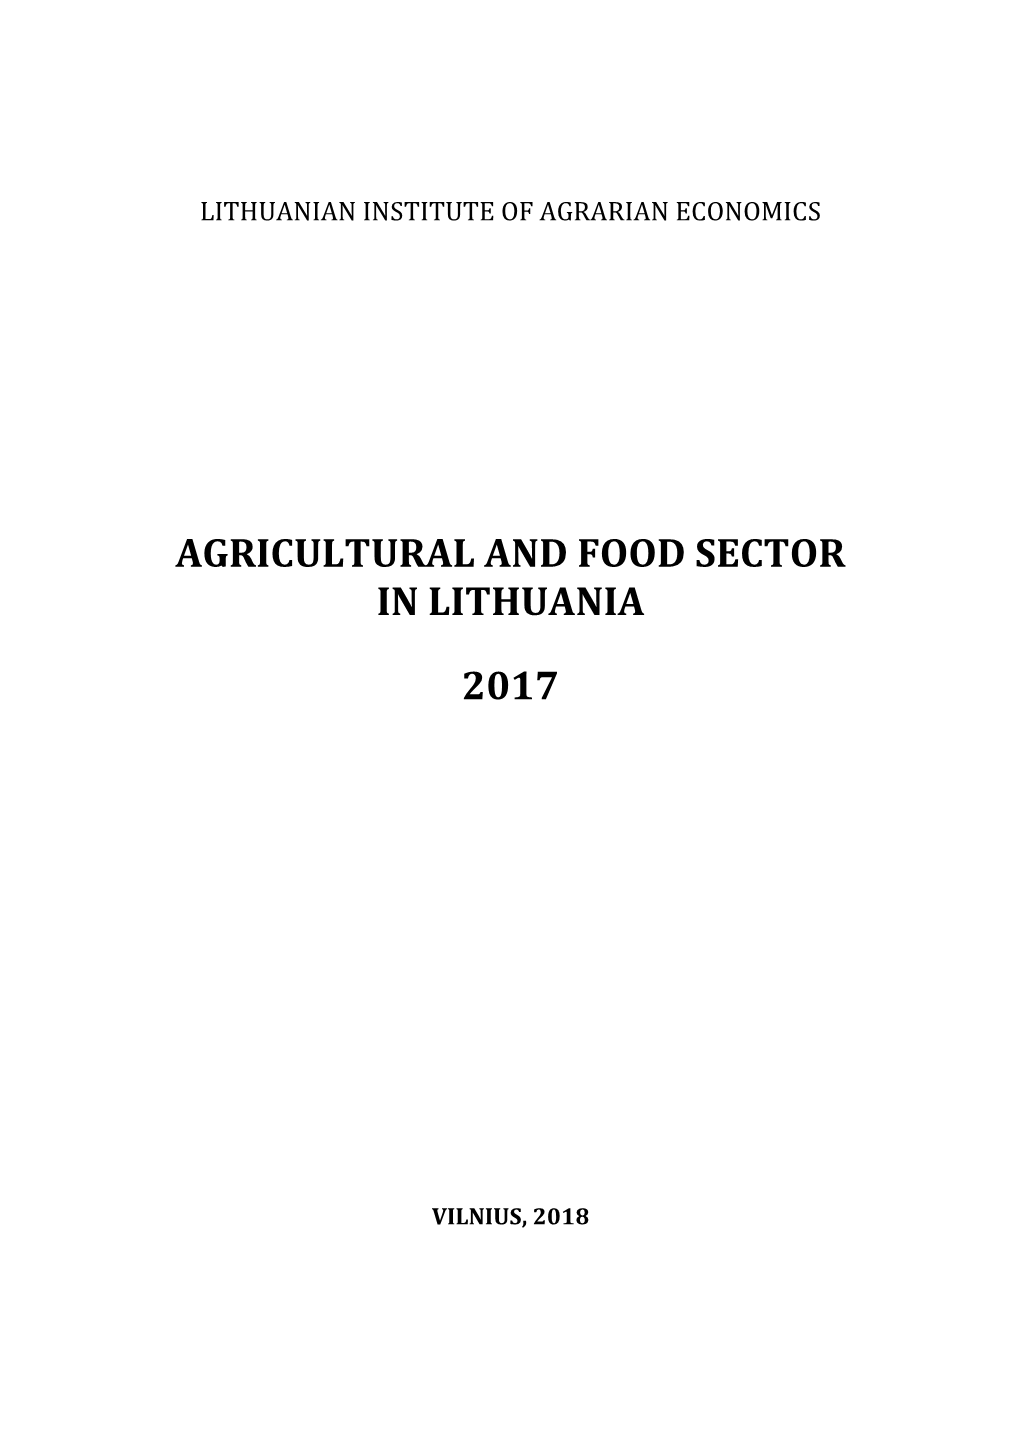 Agricultural and Food Sector in Lithuania 2017